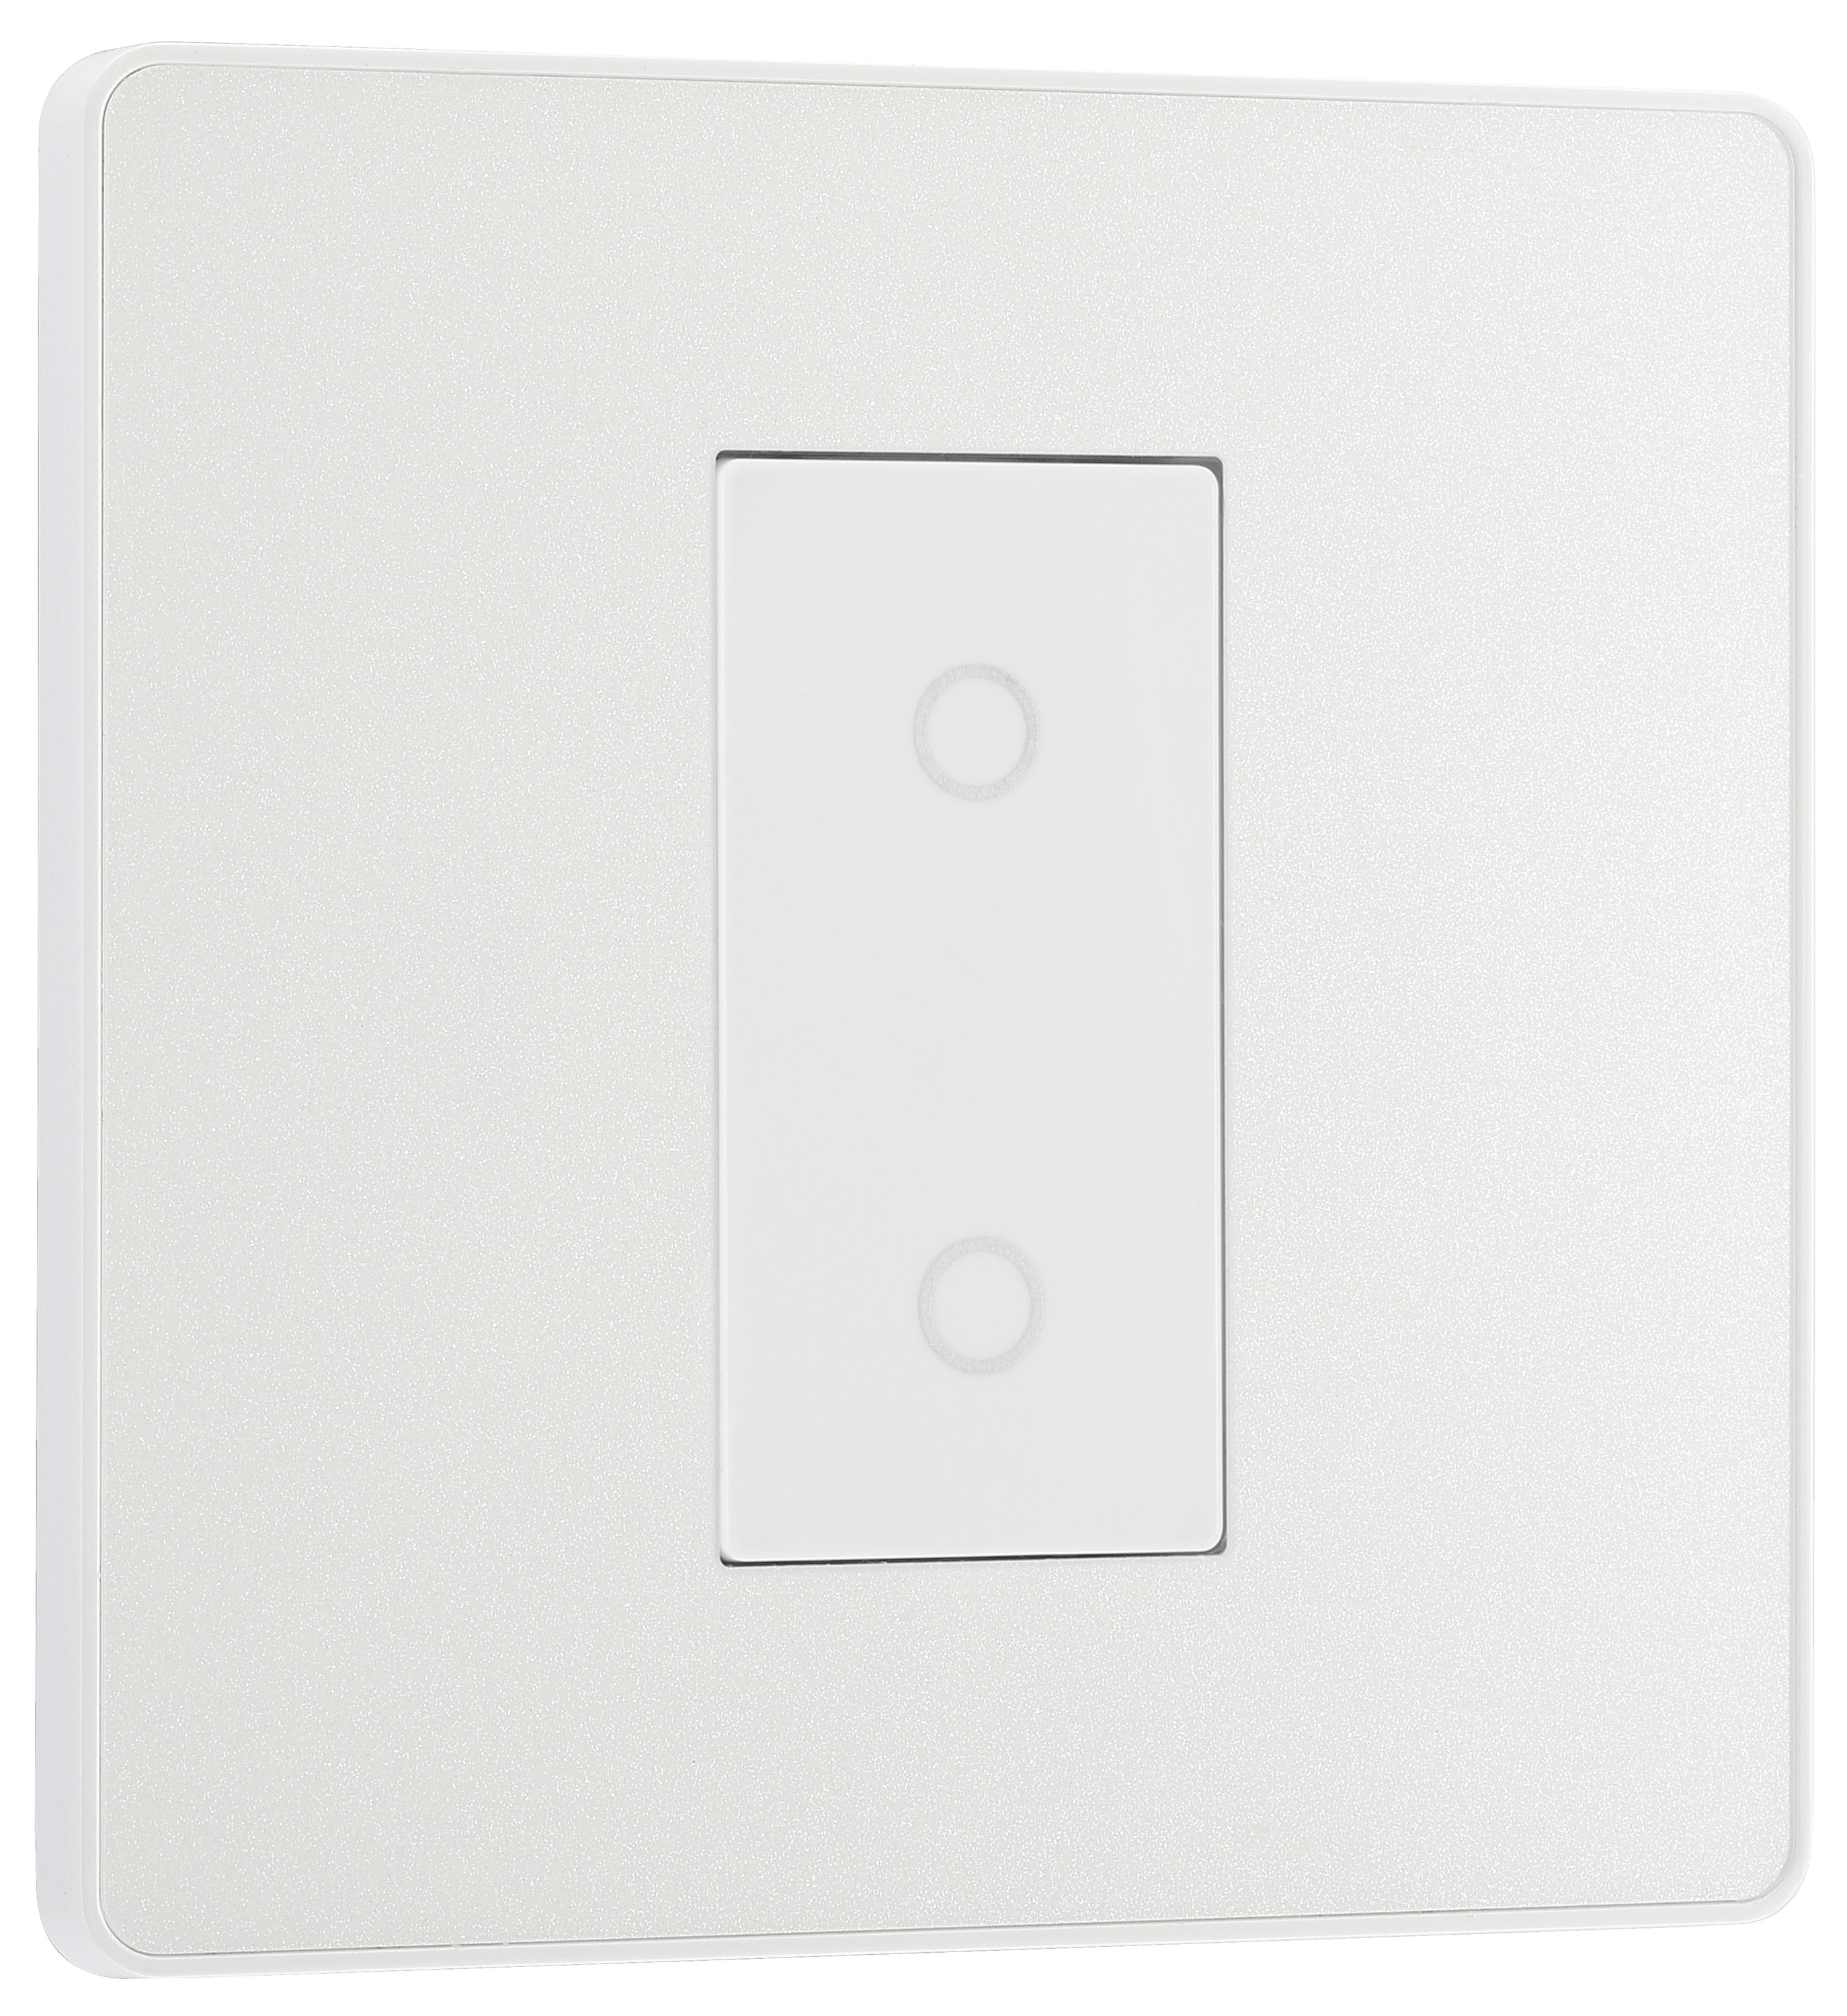 BG Evolve Pearlescent White 2 Way Secondary Single Touch Dimmer Switch - 200W